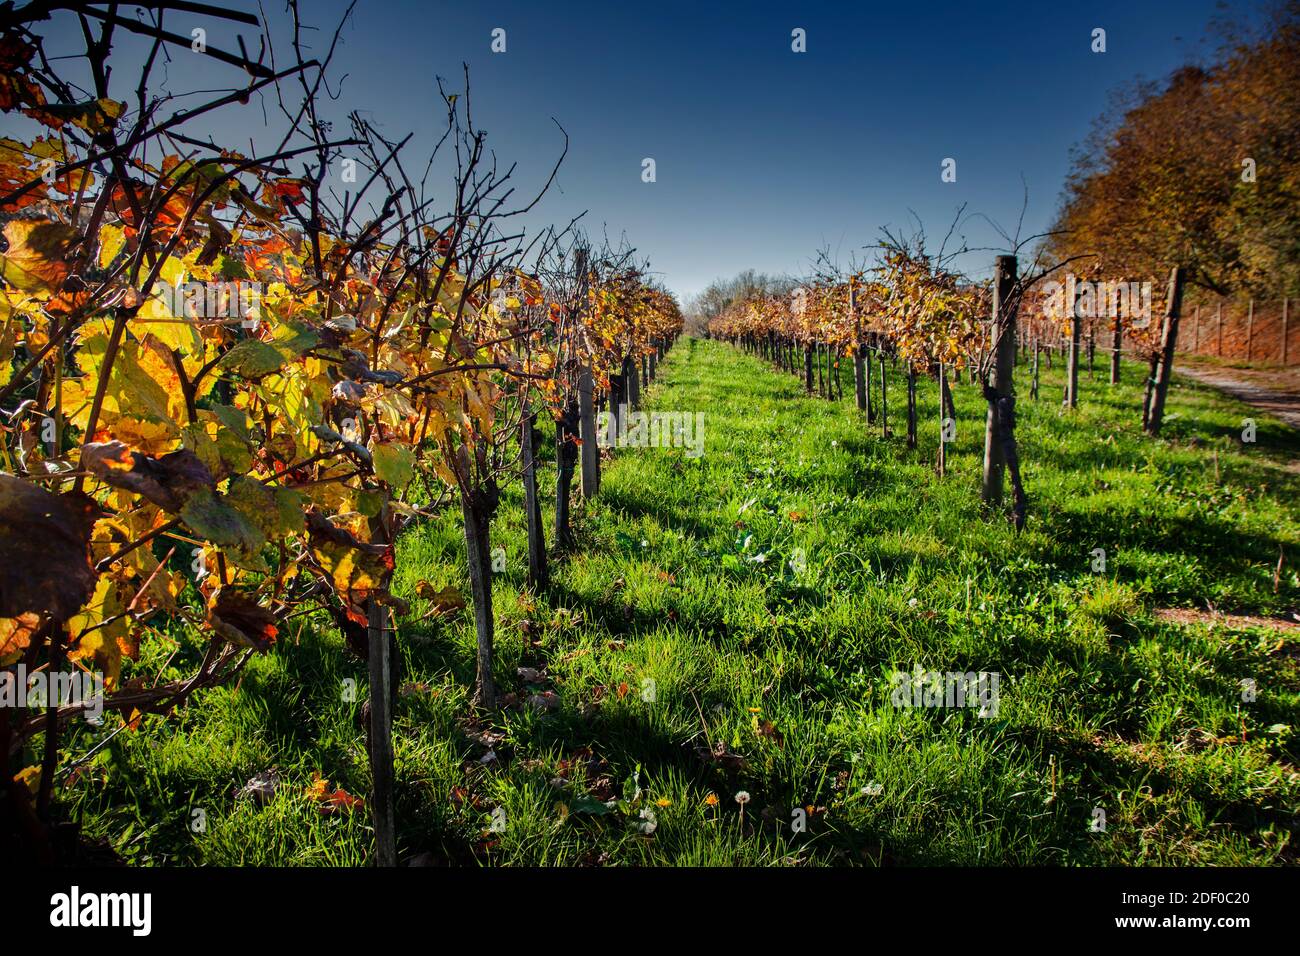 Rows of the Vine in the Autumn Vineyard. Afternoon Strong Sun. Wide Angle Photo. Stock Photo